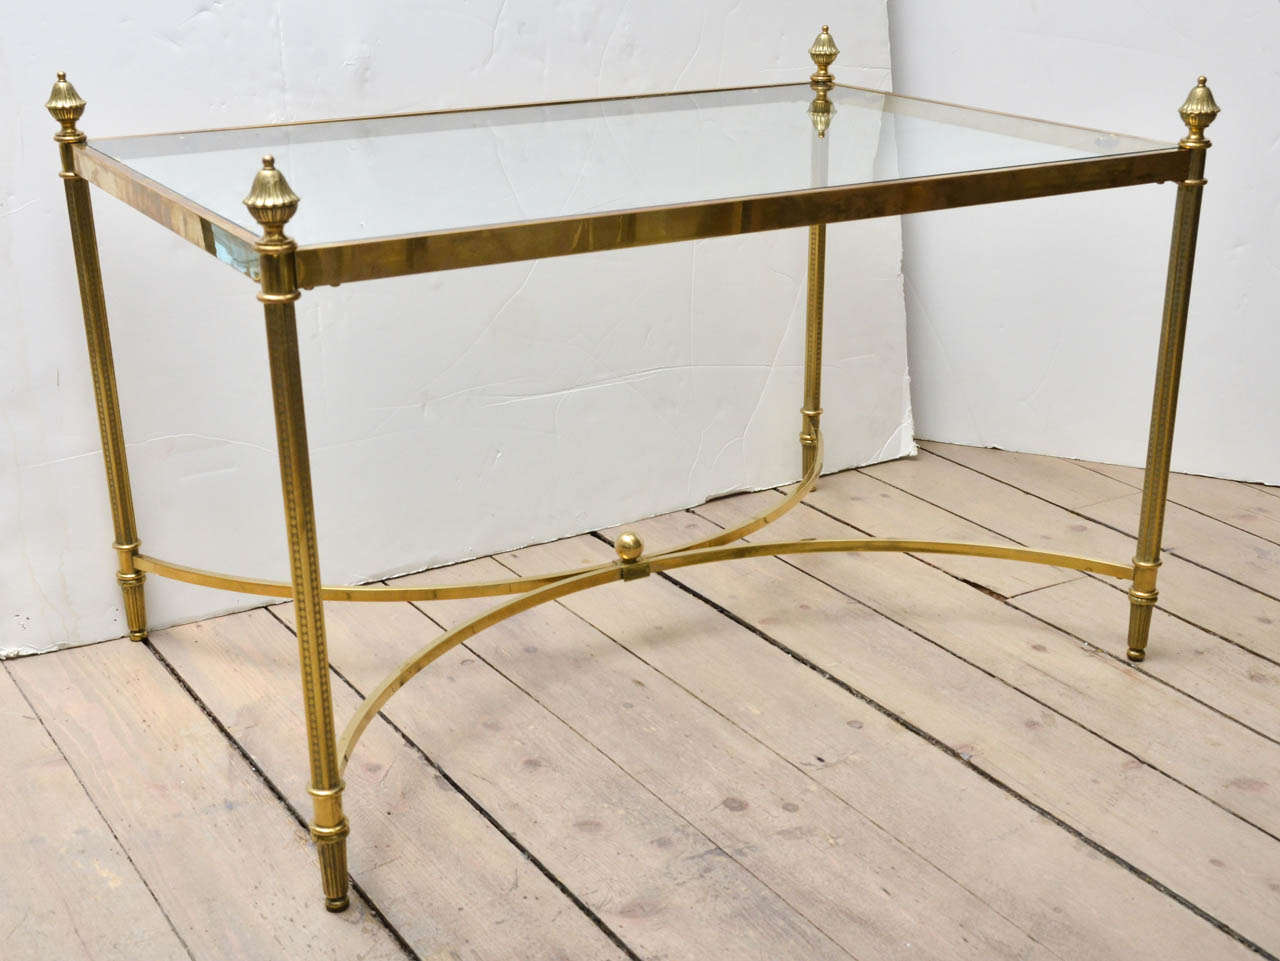 Decorative Brass and Glass Side Table with Acorn Finials, by Bagues